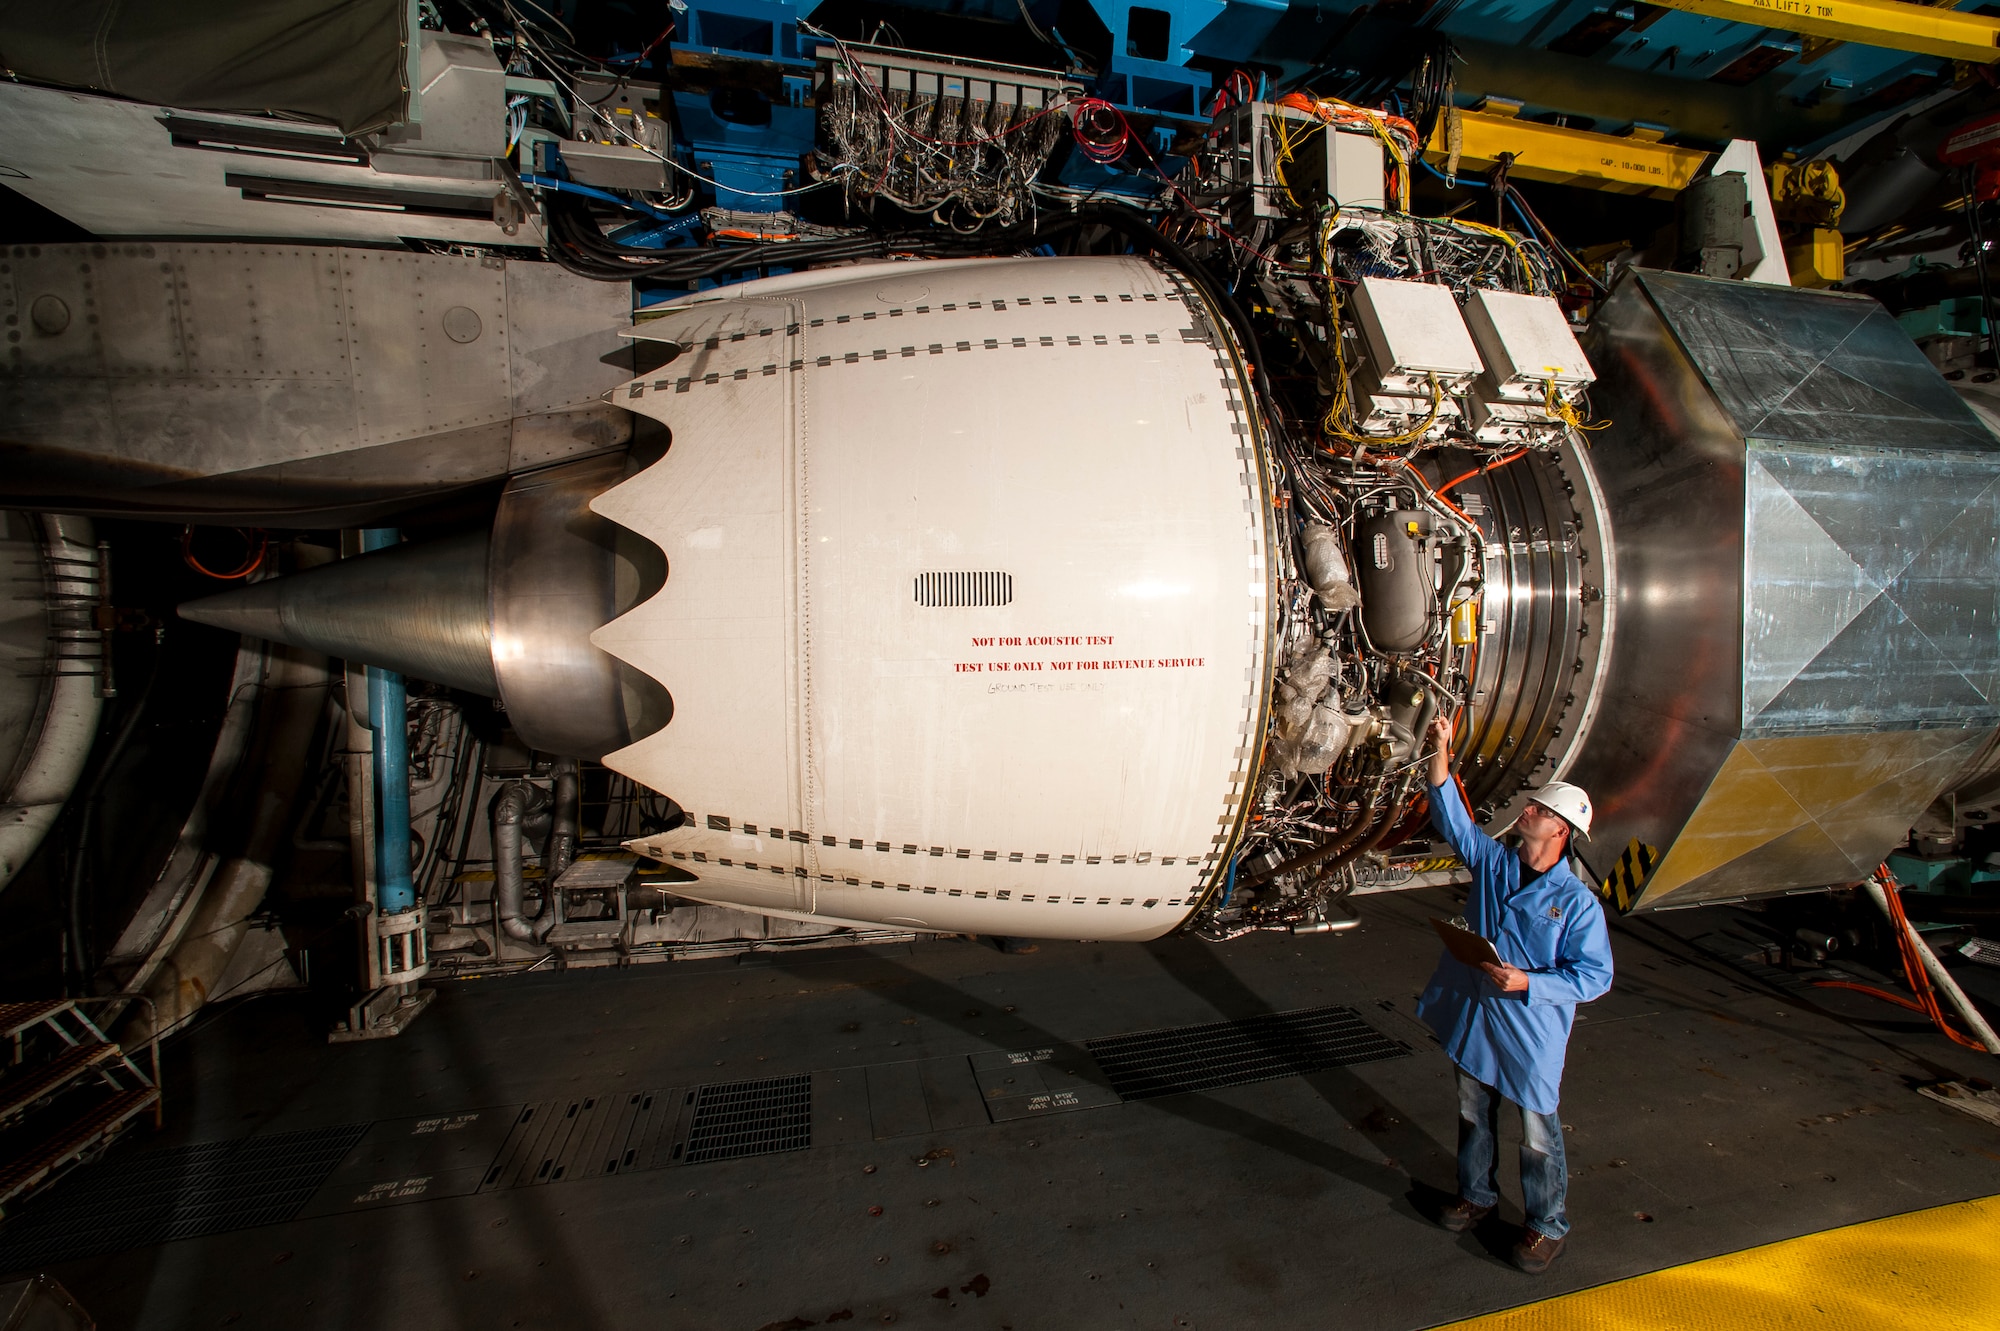 Performance testing on the Rolls-Royce Trent 1000-TEN engine was recently completed in the Aeropropulsion Systems Test Facility (ASTF) C-2 engine test cell at AEDC. Pictured is Eric Brumley, ATA outside machinist, inspecting the engine prior to the test. (Photo by Rick Goodfriend)